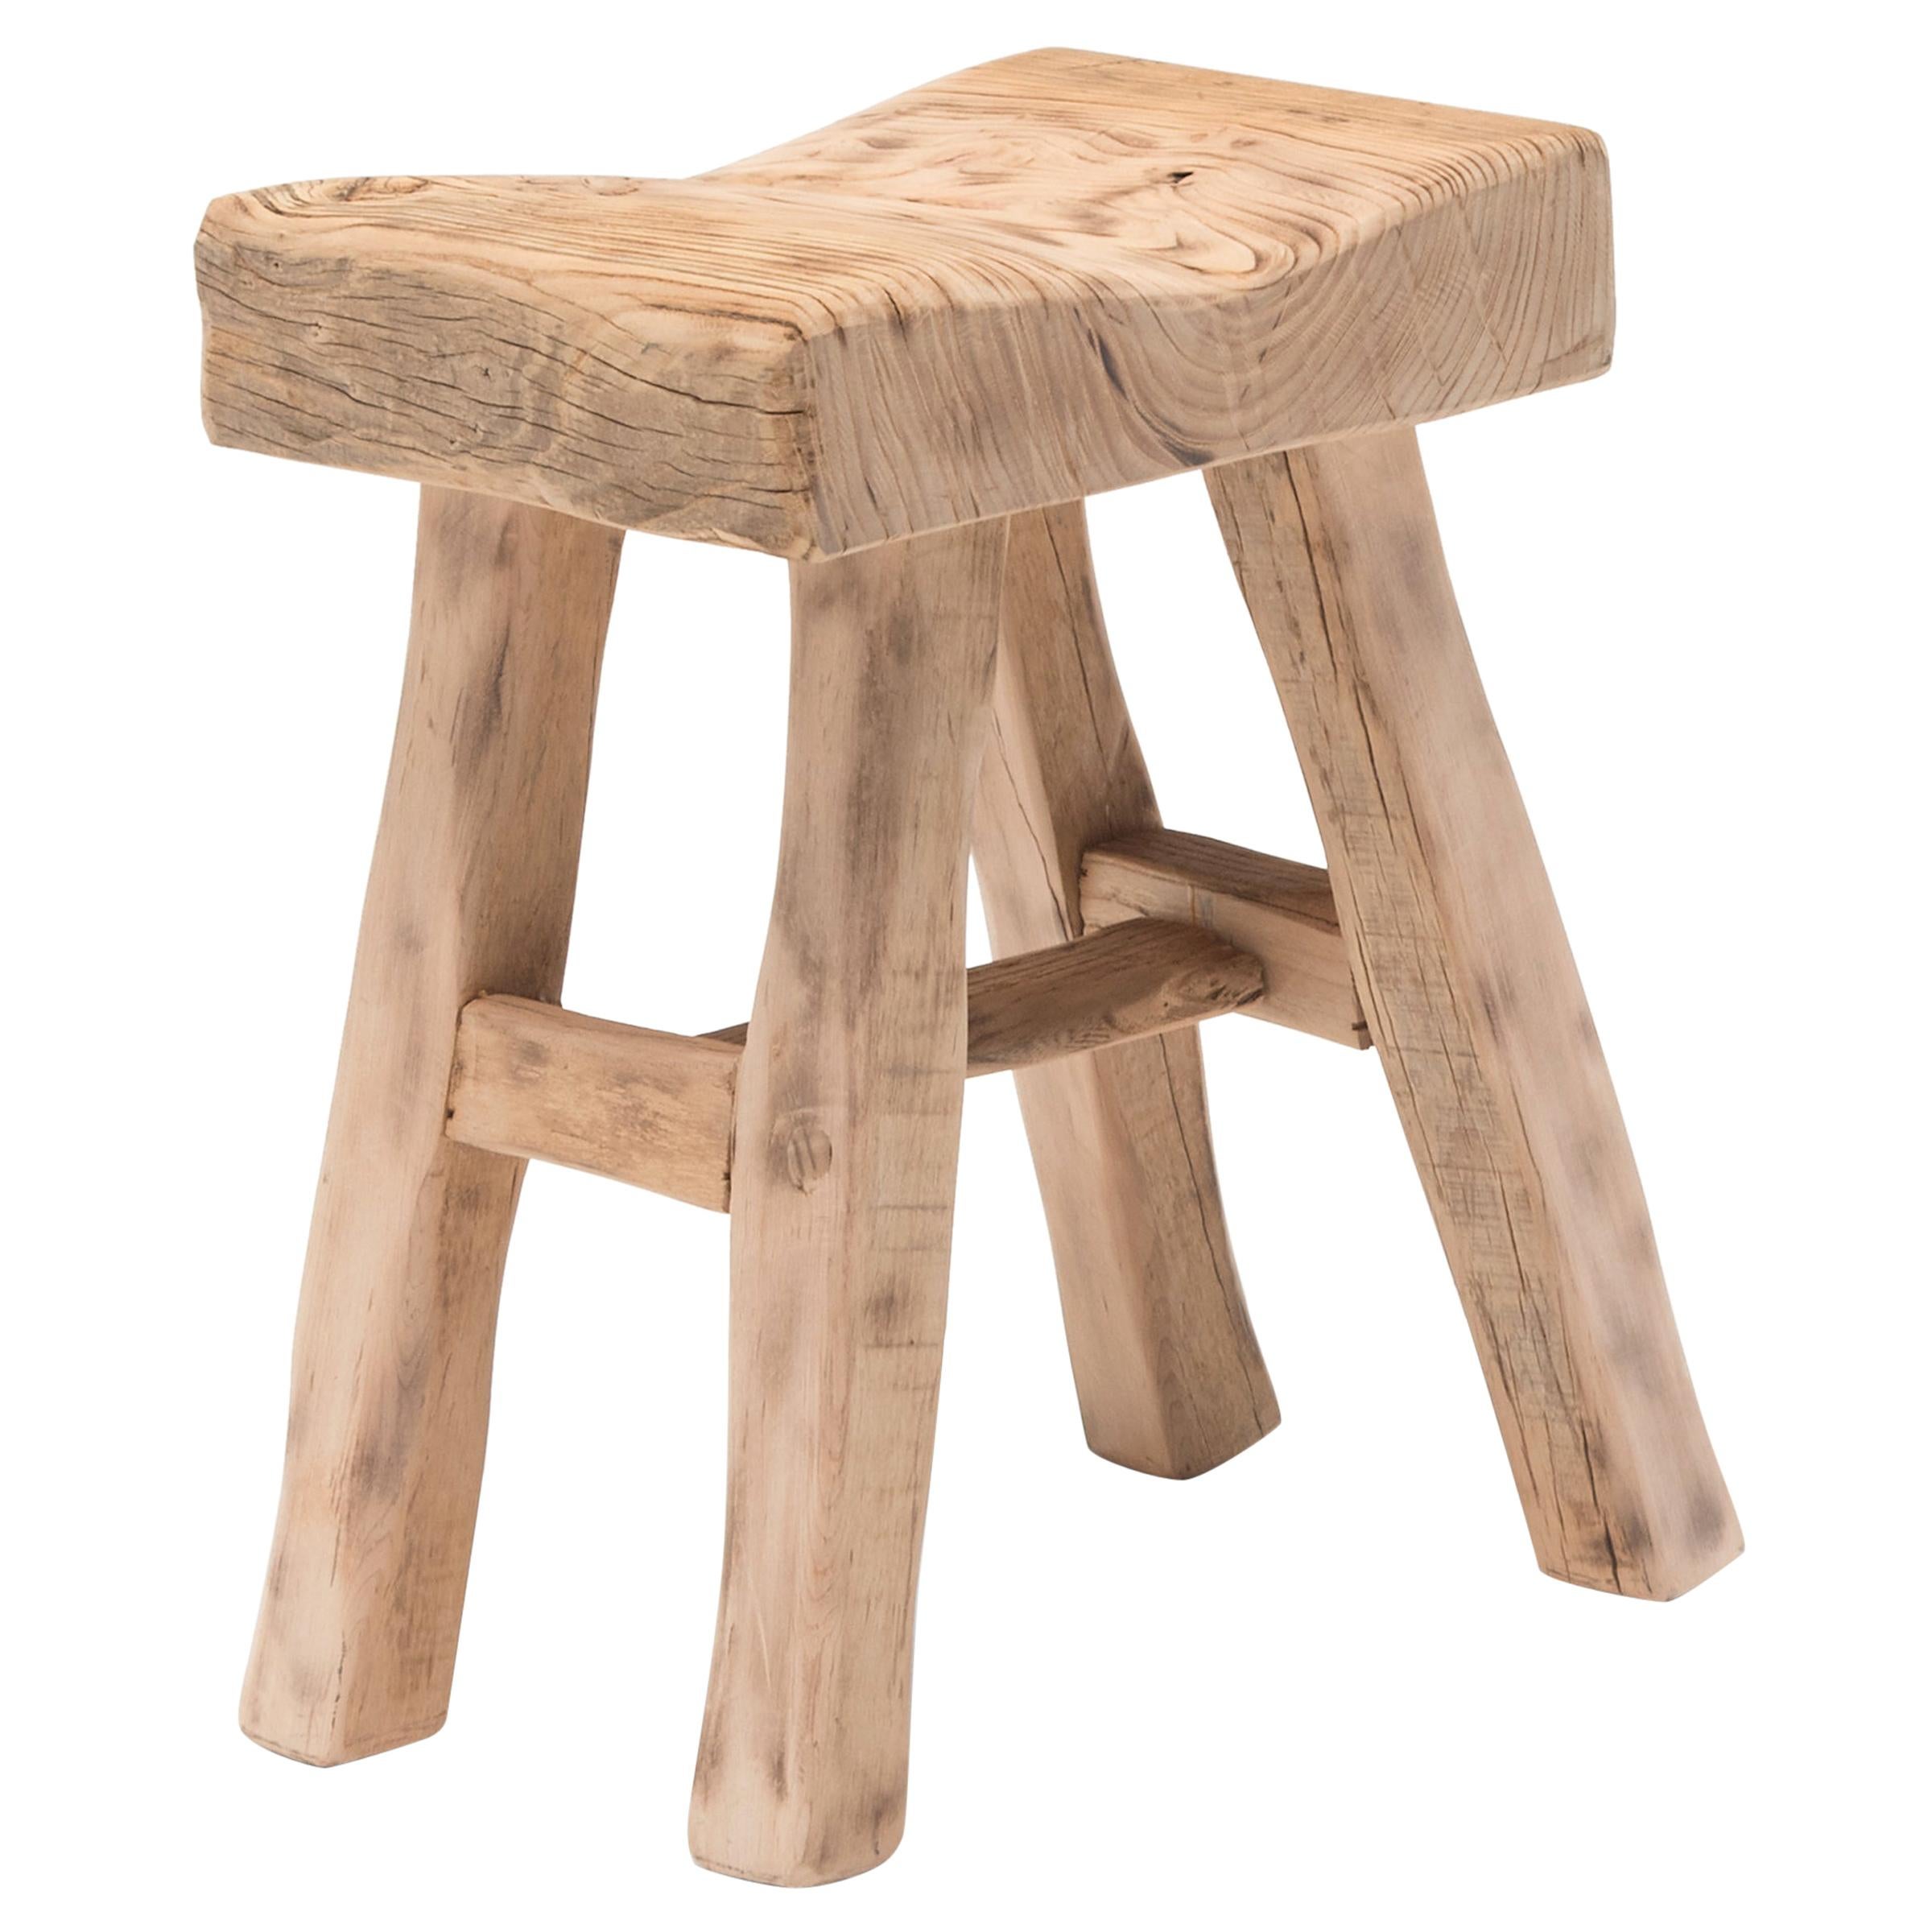 Reclaimed Chinese Elm Courtyard Stool